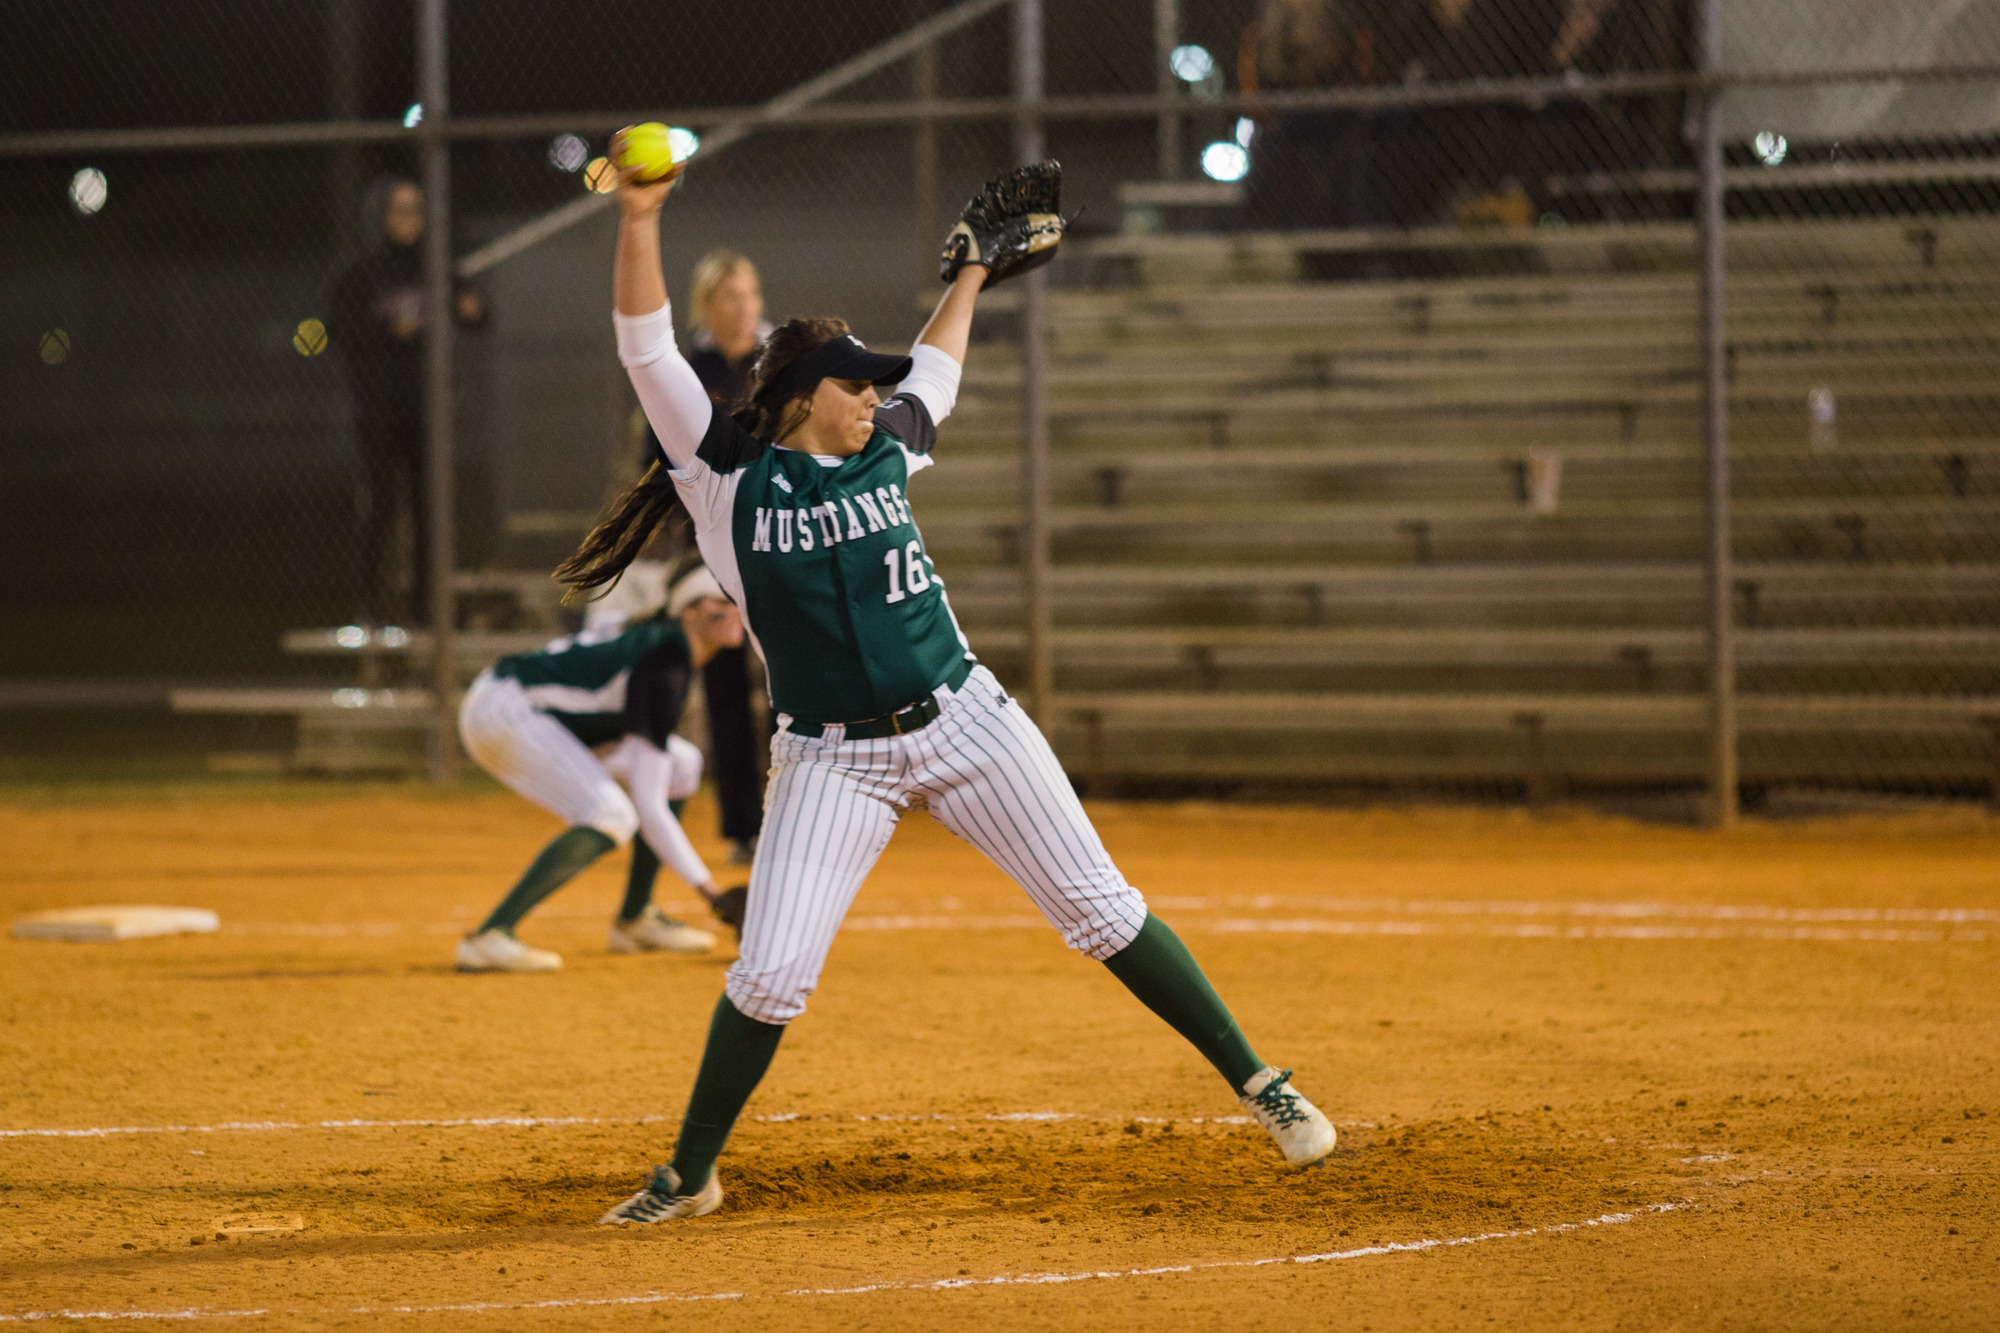 Sophomore Payton Kinney fires a pitch to the plate against Sarasota High. Photo by Kayleigh Omang.